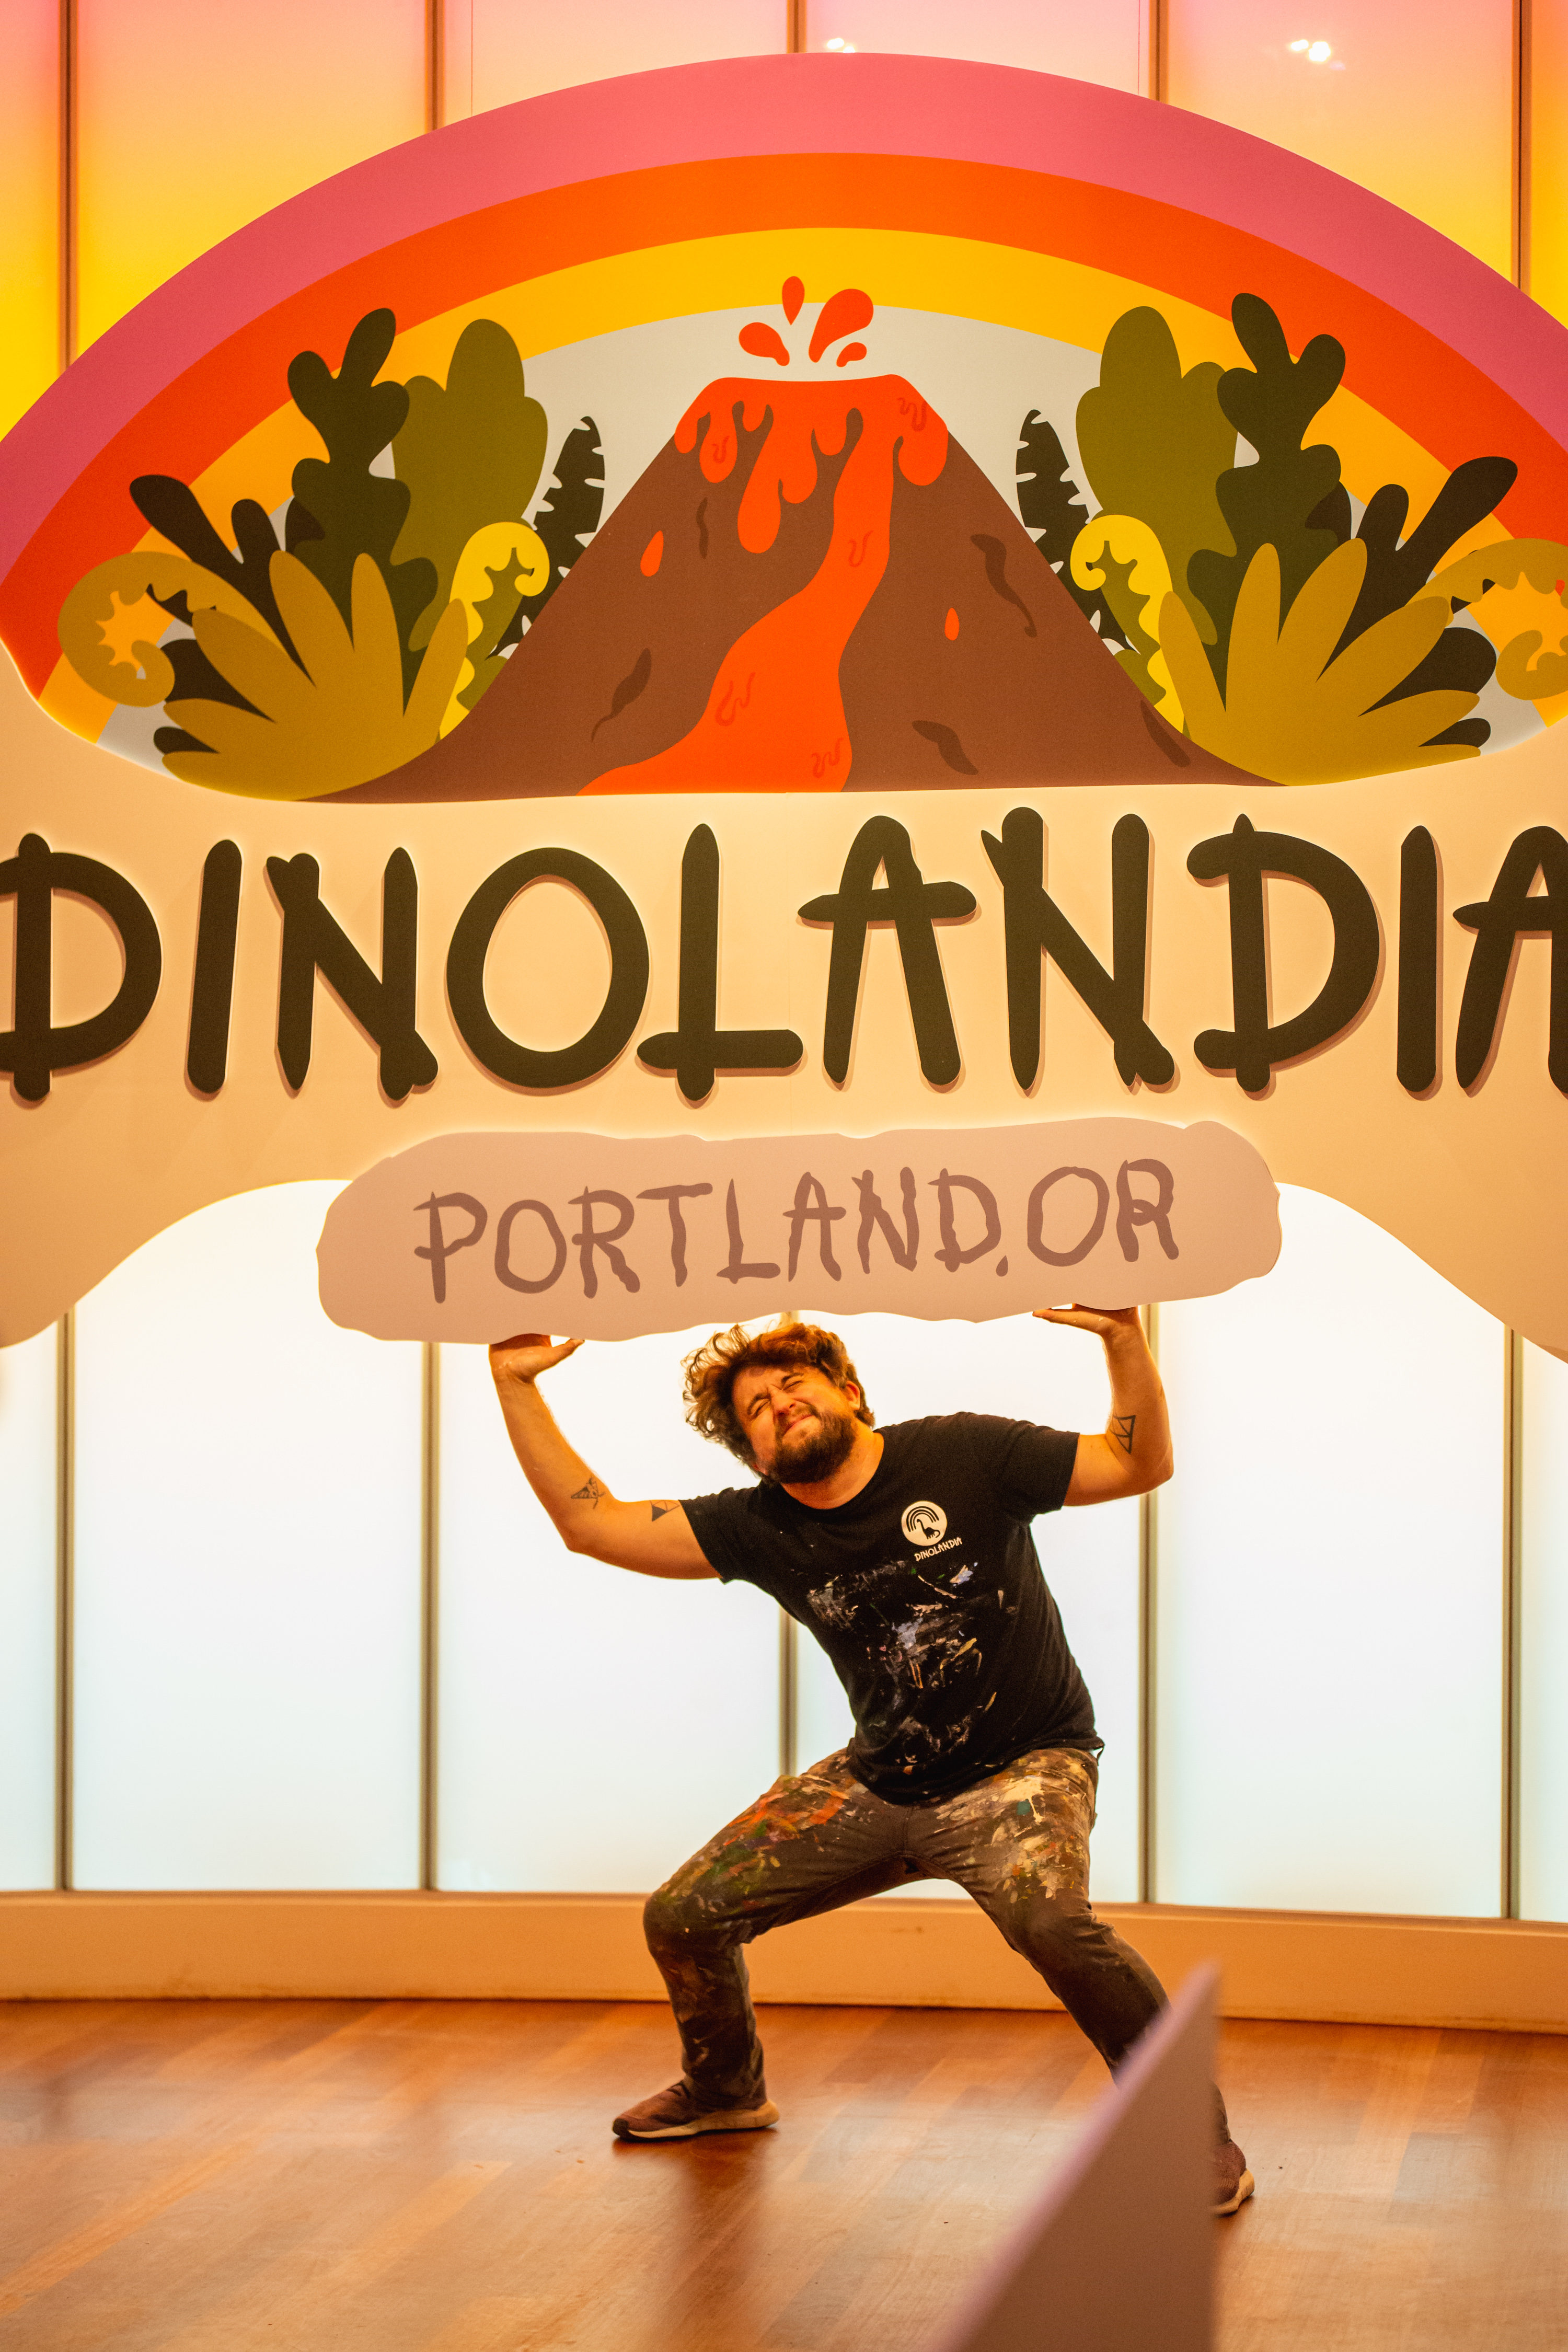 Mike Bennett with the Dinolandia sign created by Infinity Images.